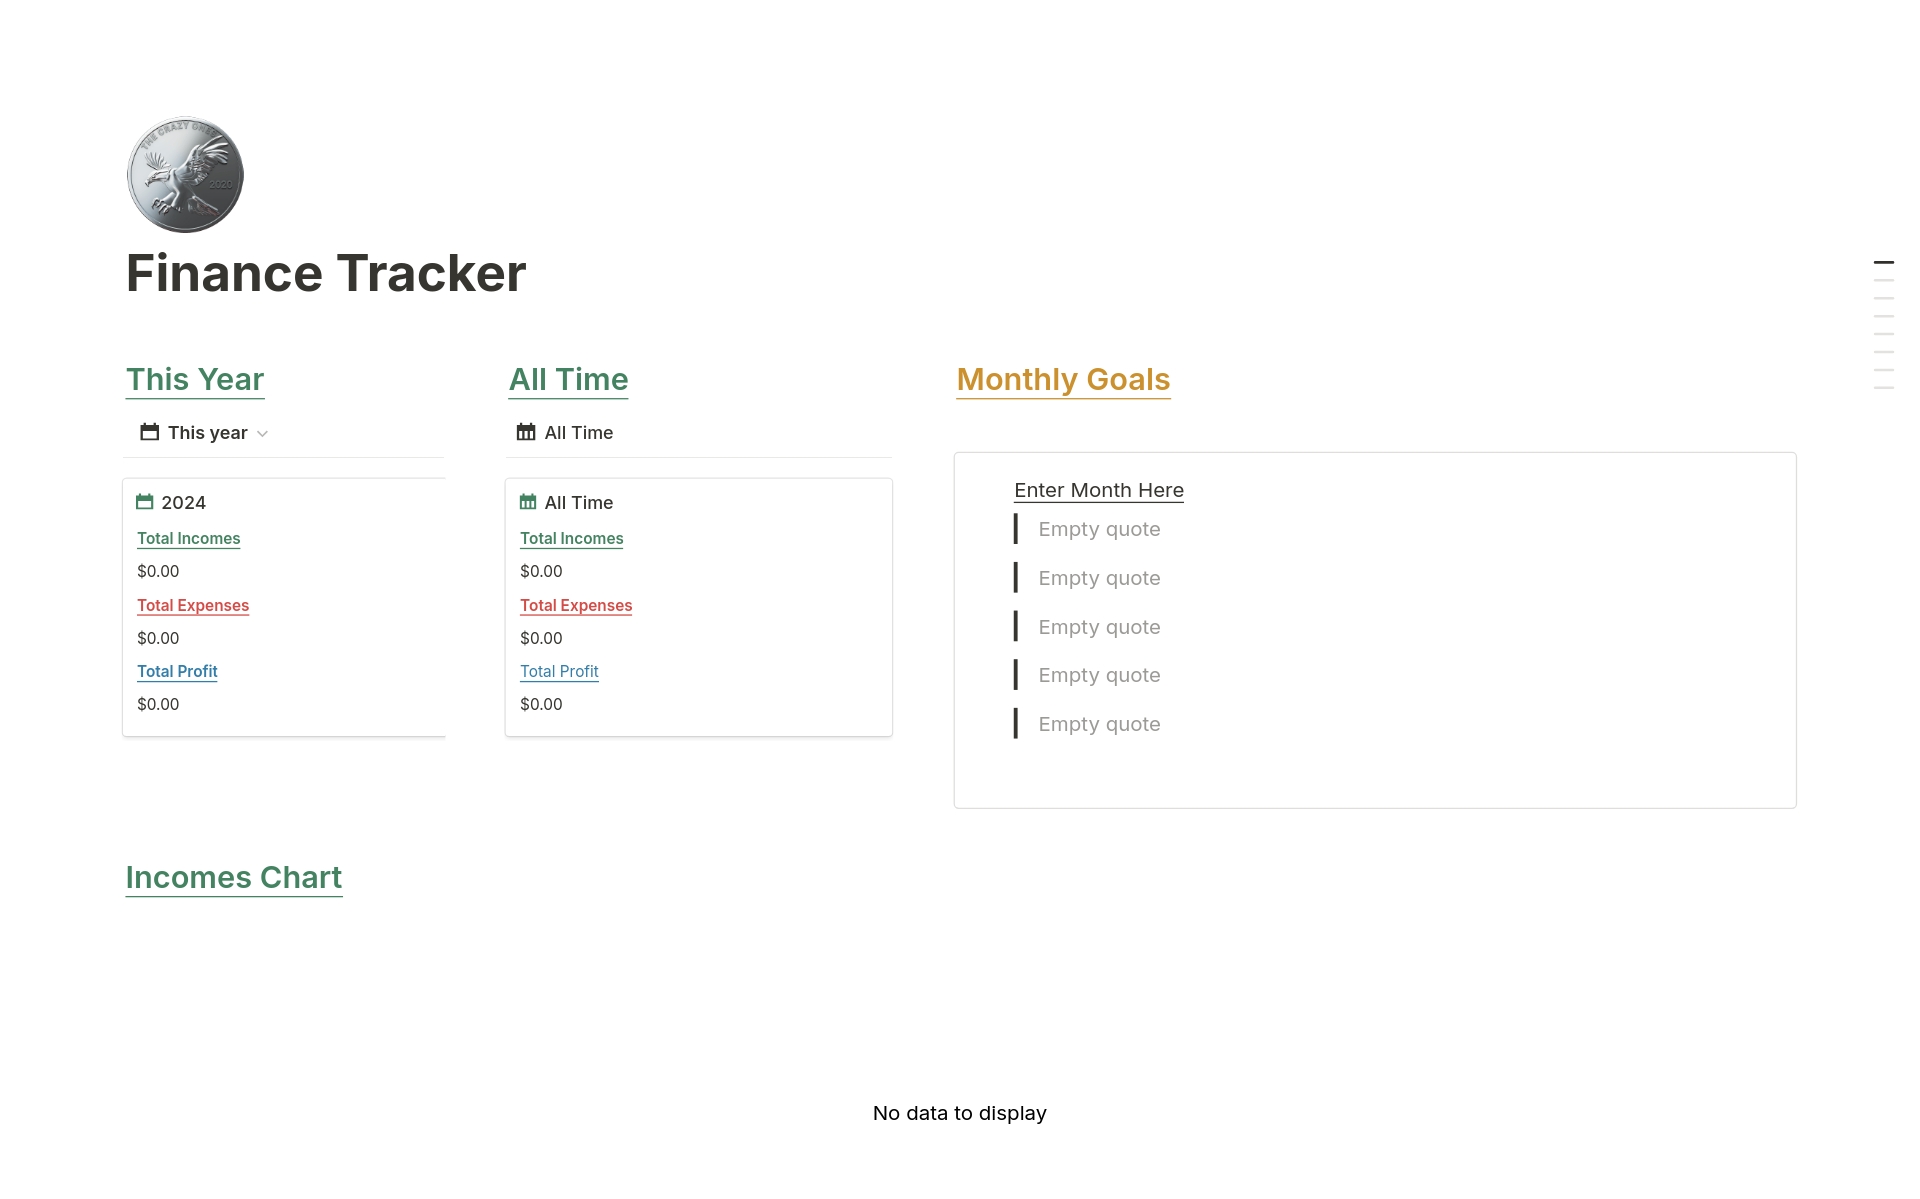 Take control of your finances with my Notion Finance Tracker! It’s a comprehensive tool to track income, expenses, and savings. Gain insights into your spending habits and make informed financial decisions. Let’s achieve financial wellness together!